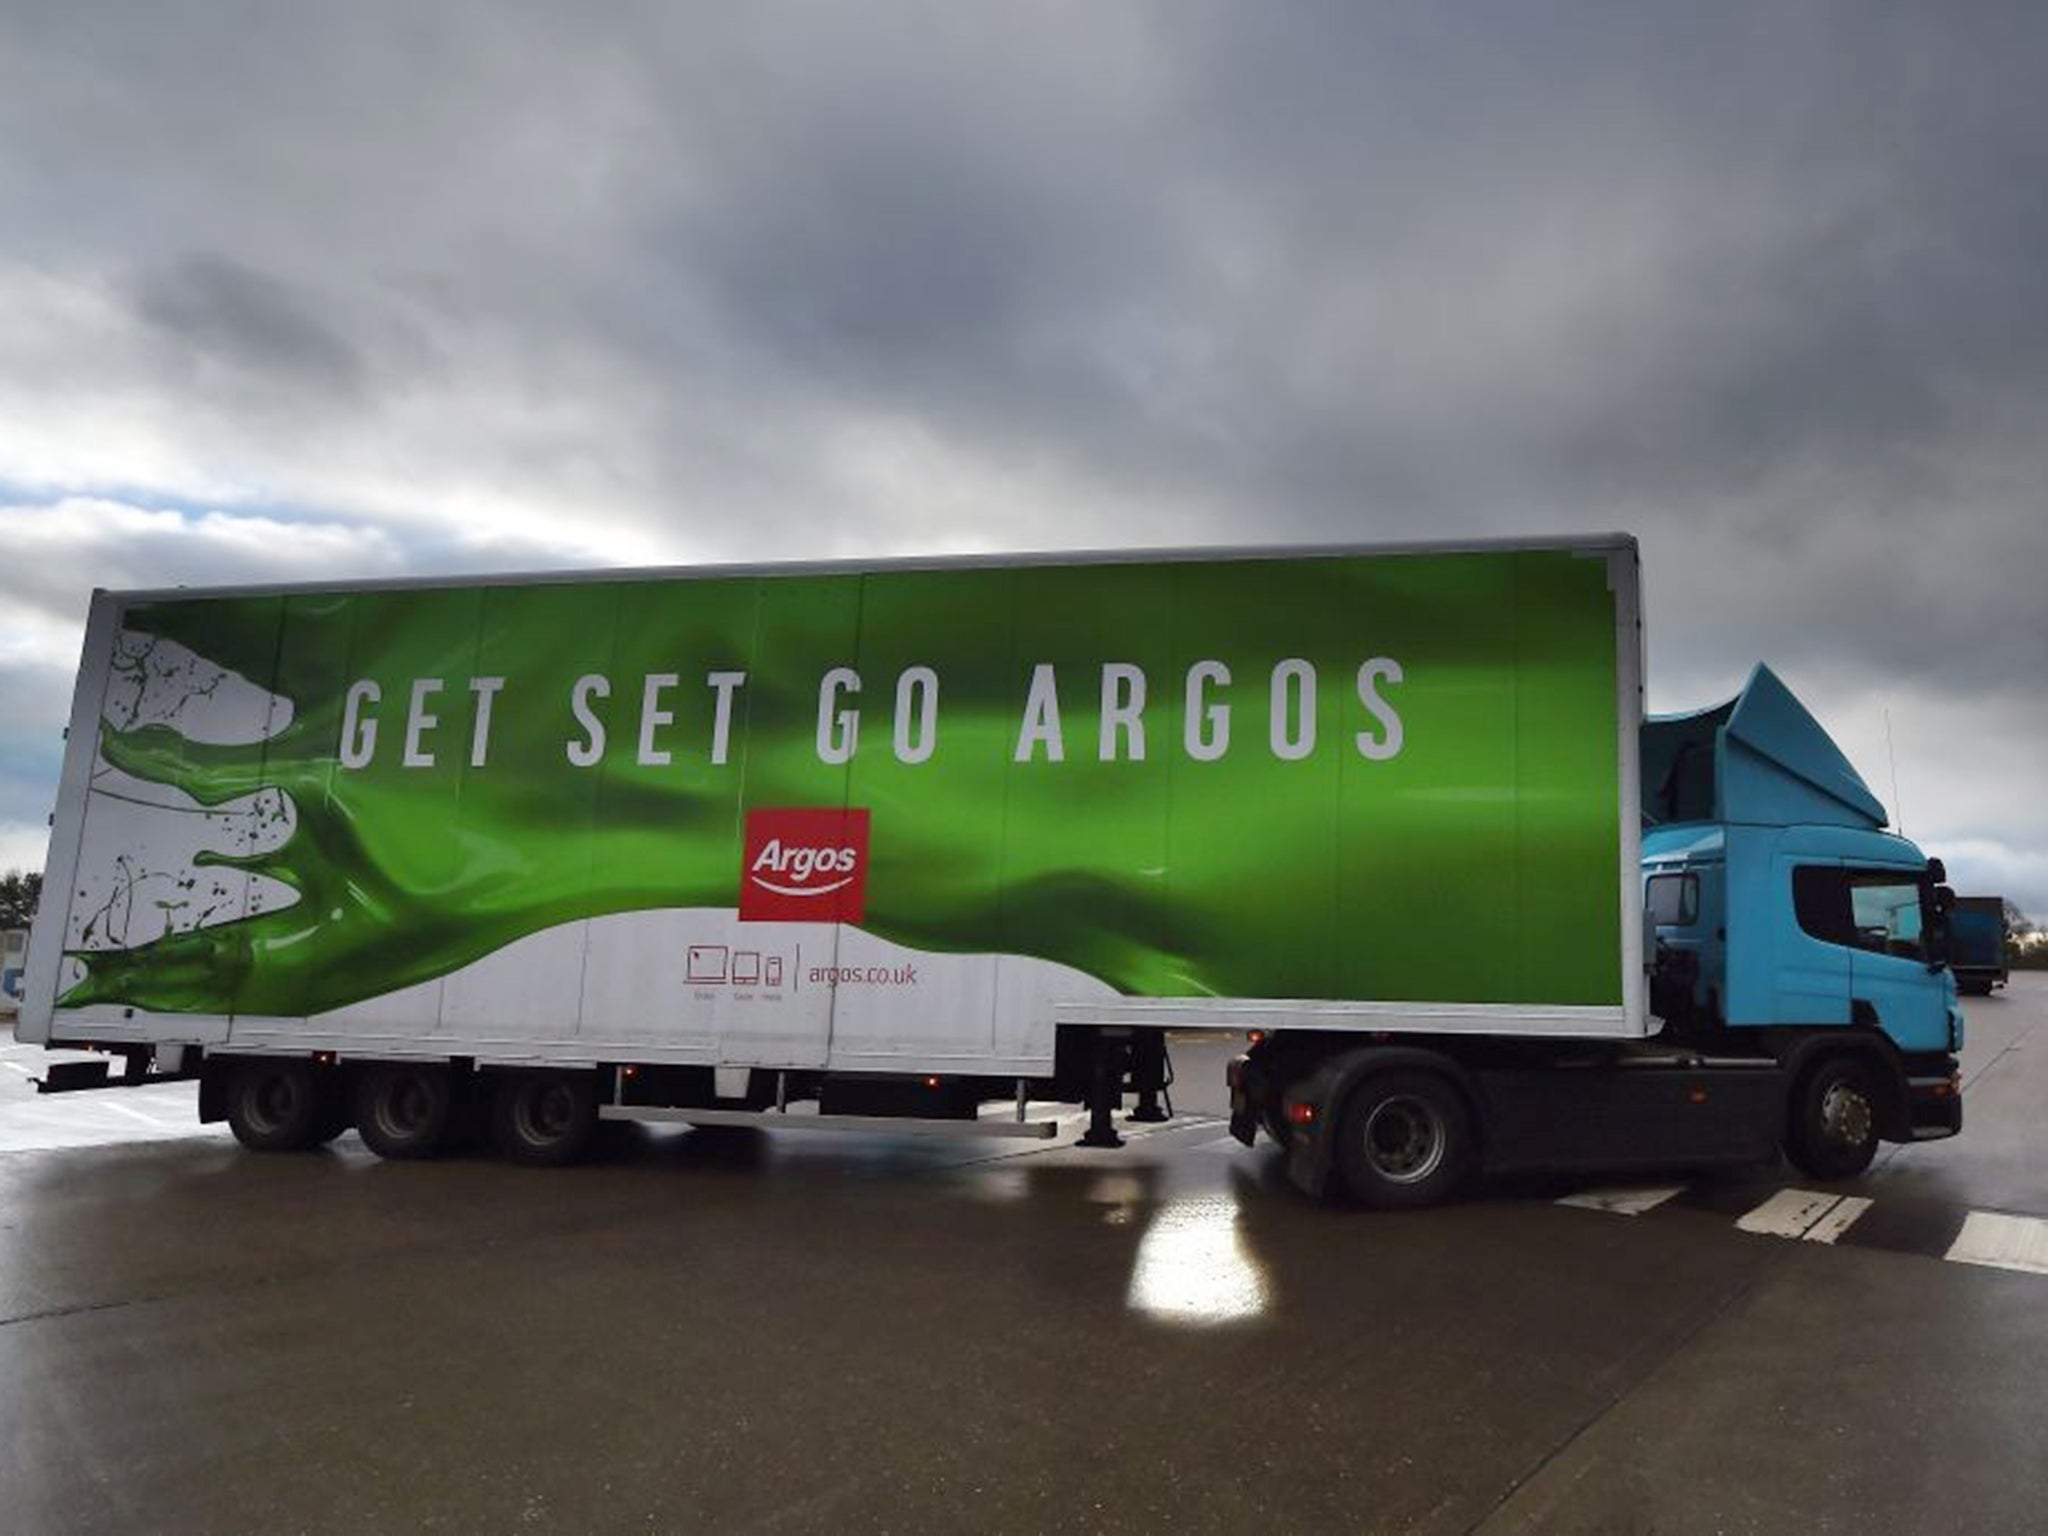 A truck arrives at the Argos Distribution Centre in Burton-upon-Trent, central England